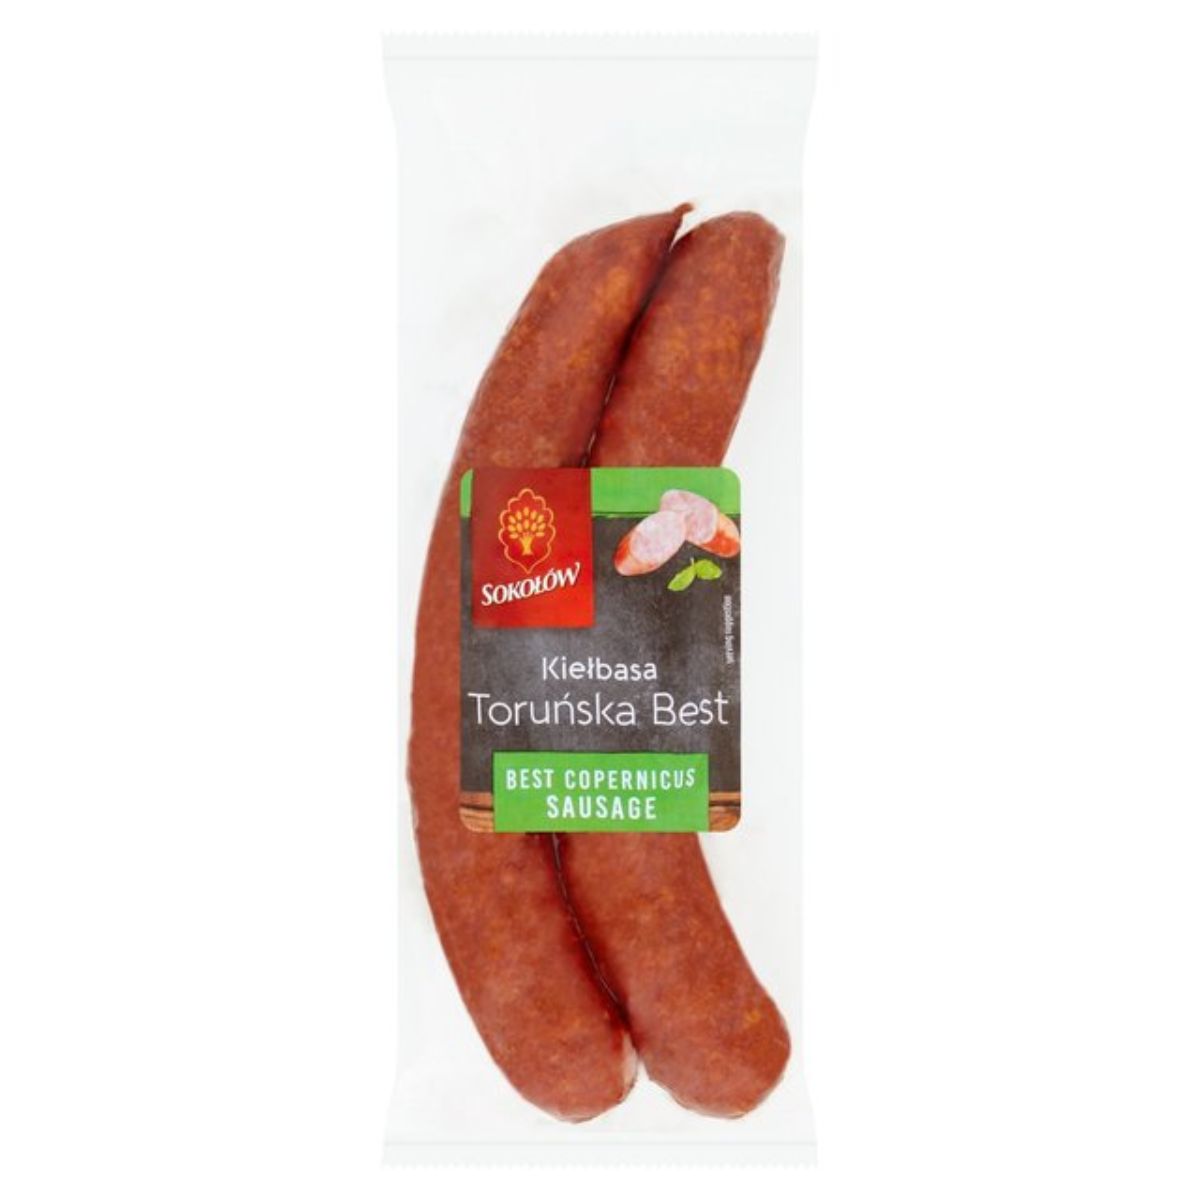 Two Sokolow - Best Copernicus Sausages in a package on a white background.